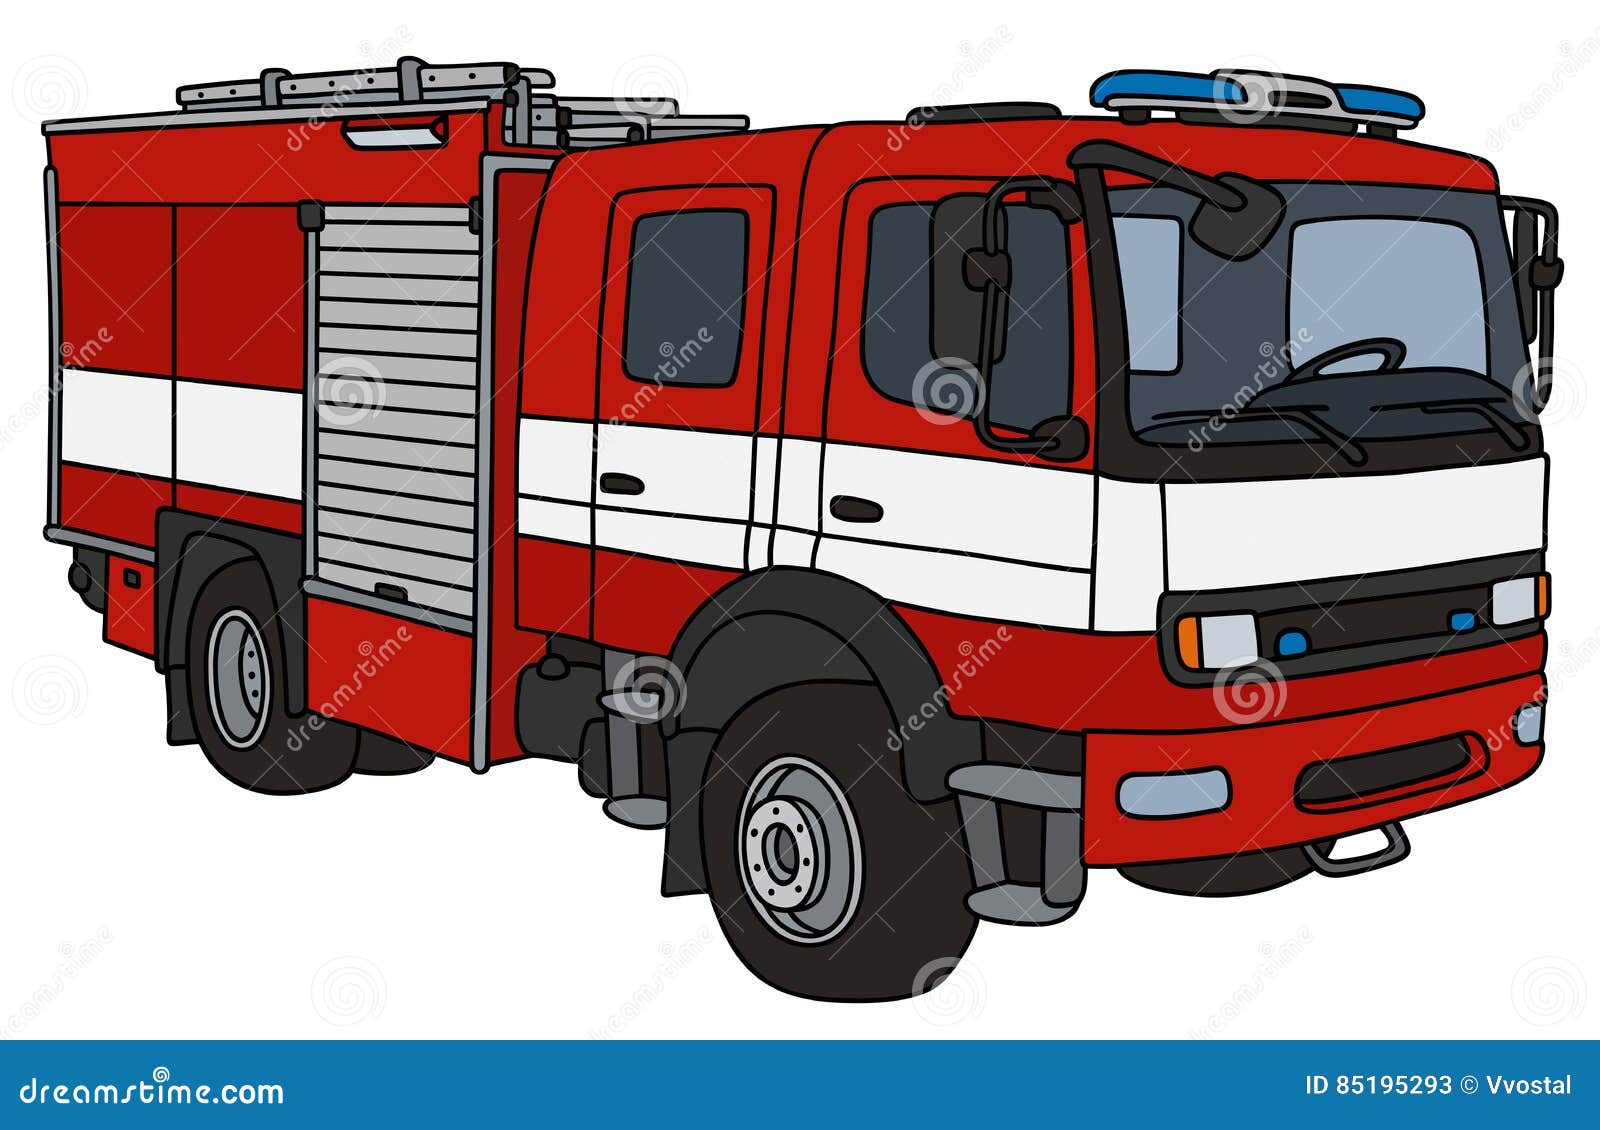 5144 Fire Truck Drawing Images Stock Photos  Vectors  Shutterstock